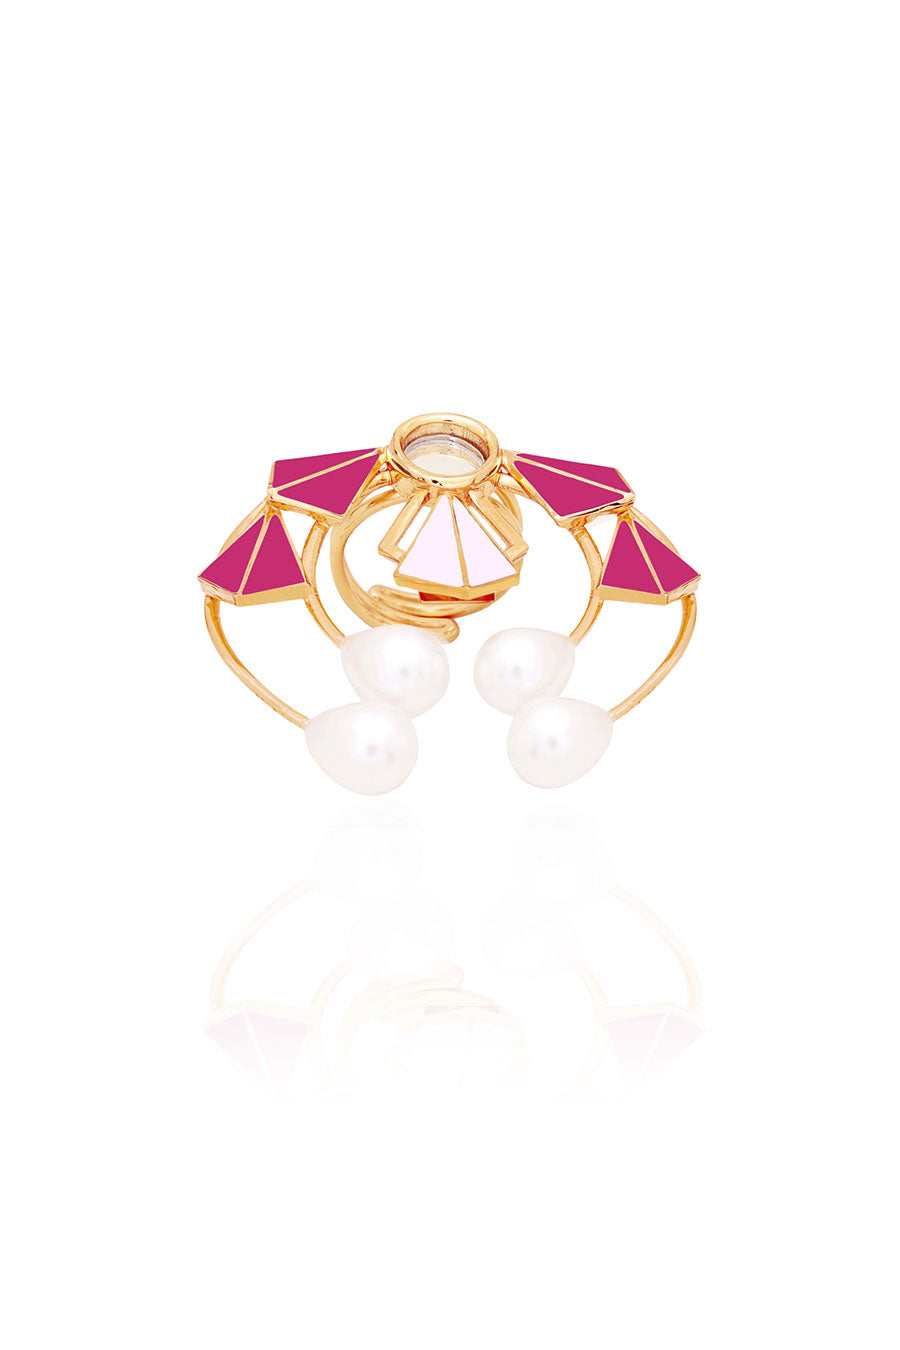 Luna Swing Gold Plated Pink Ring